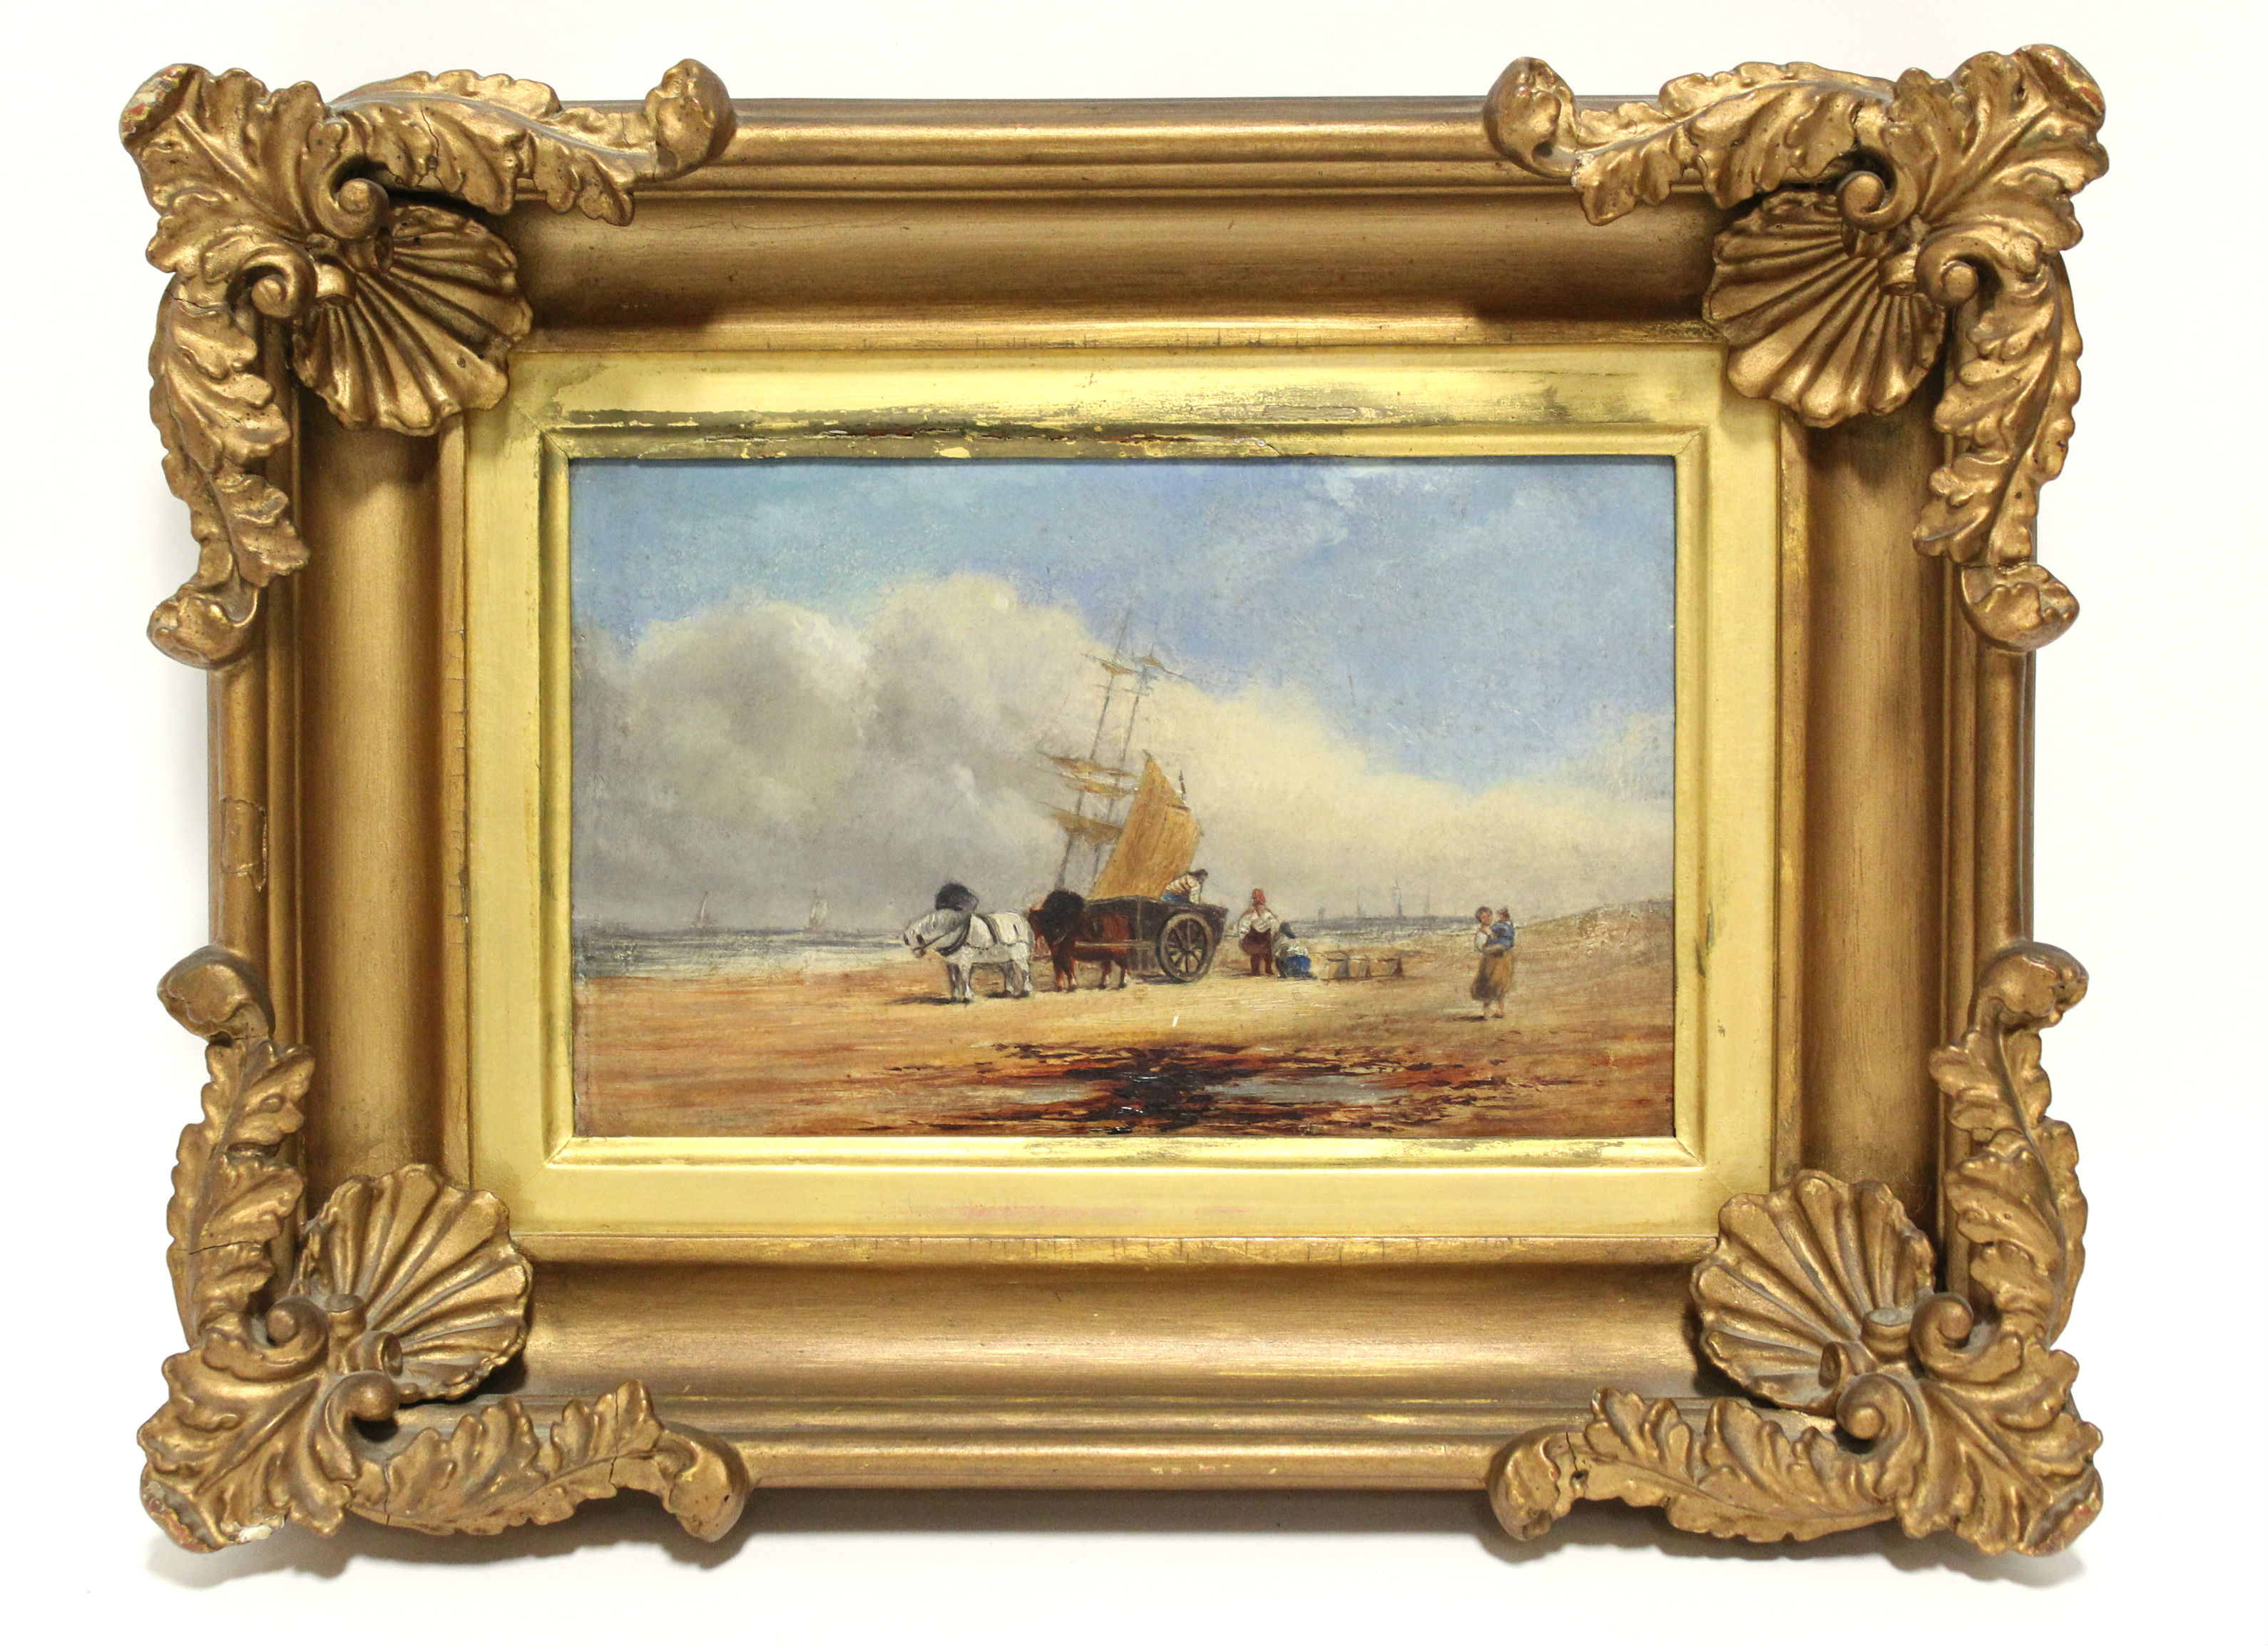 SHAYER, William (manner of ). A beach scene with a horse cart & figures un-loading the catch. Oil on